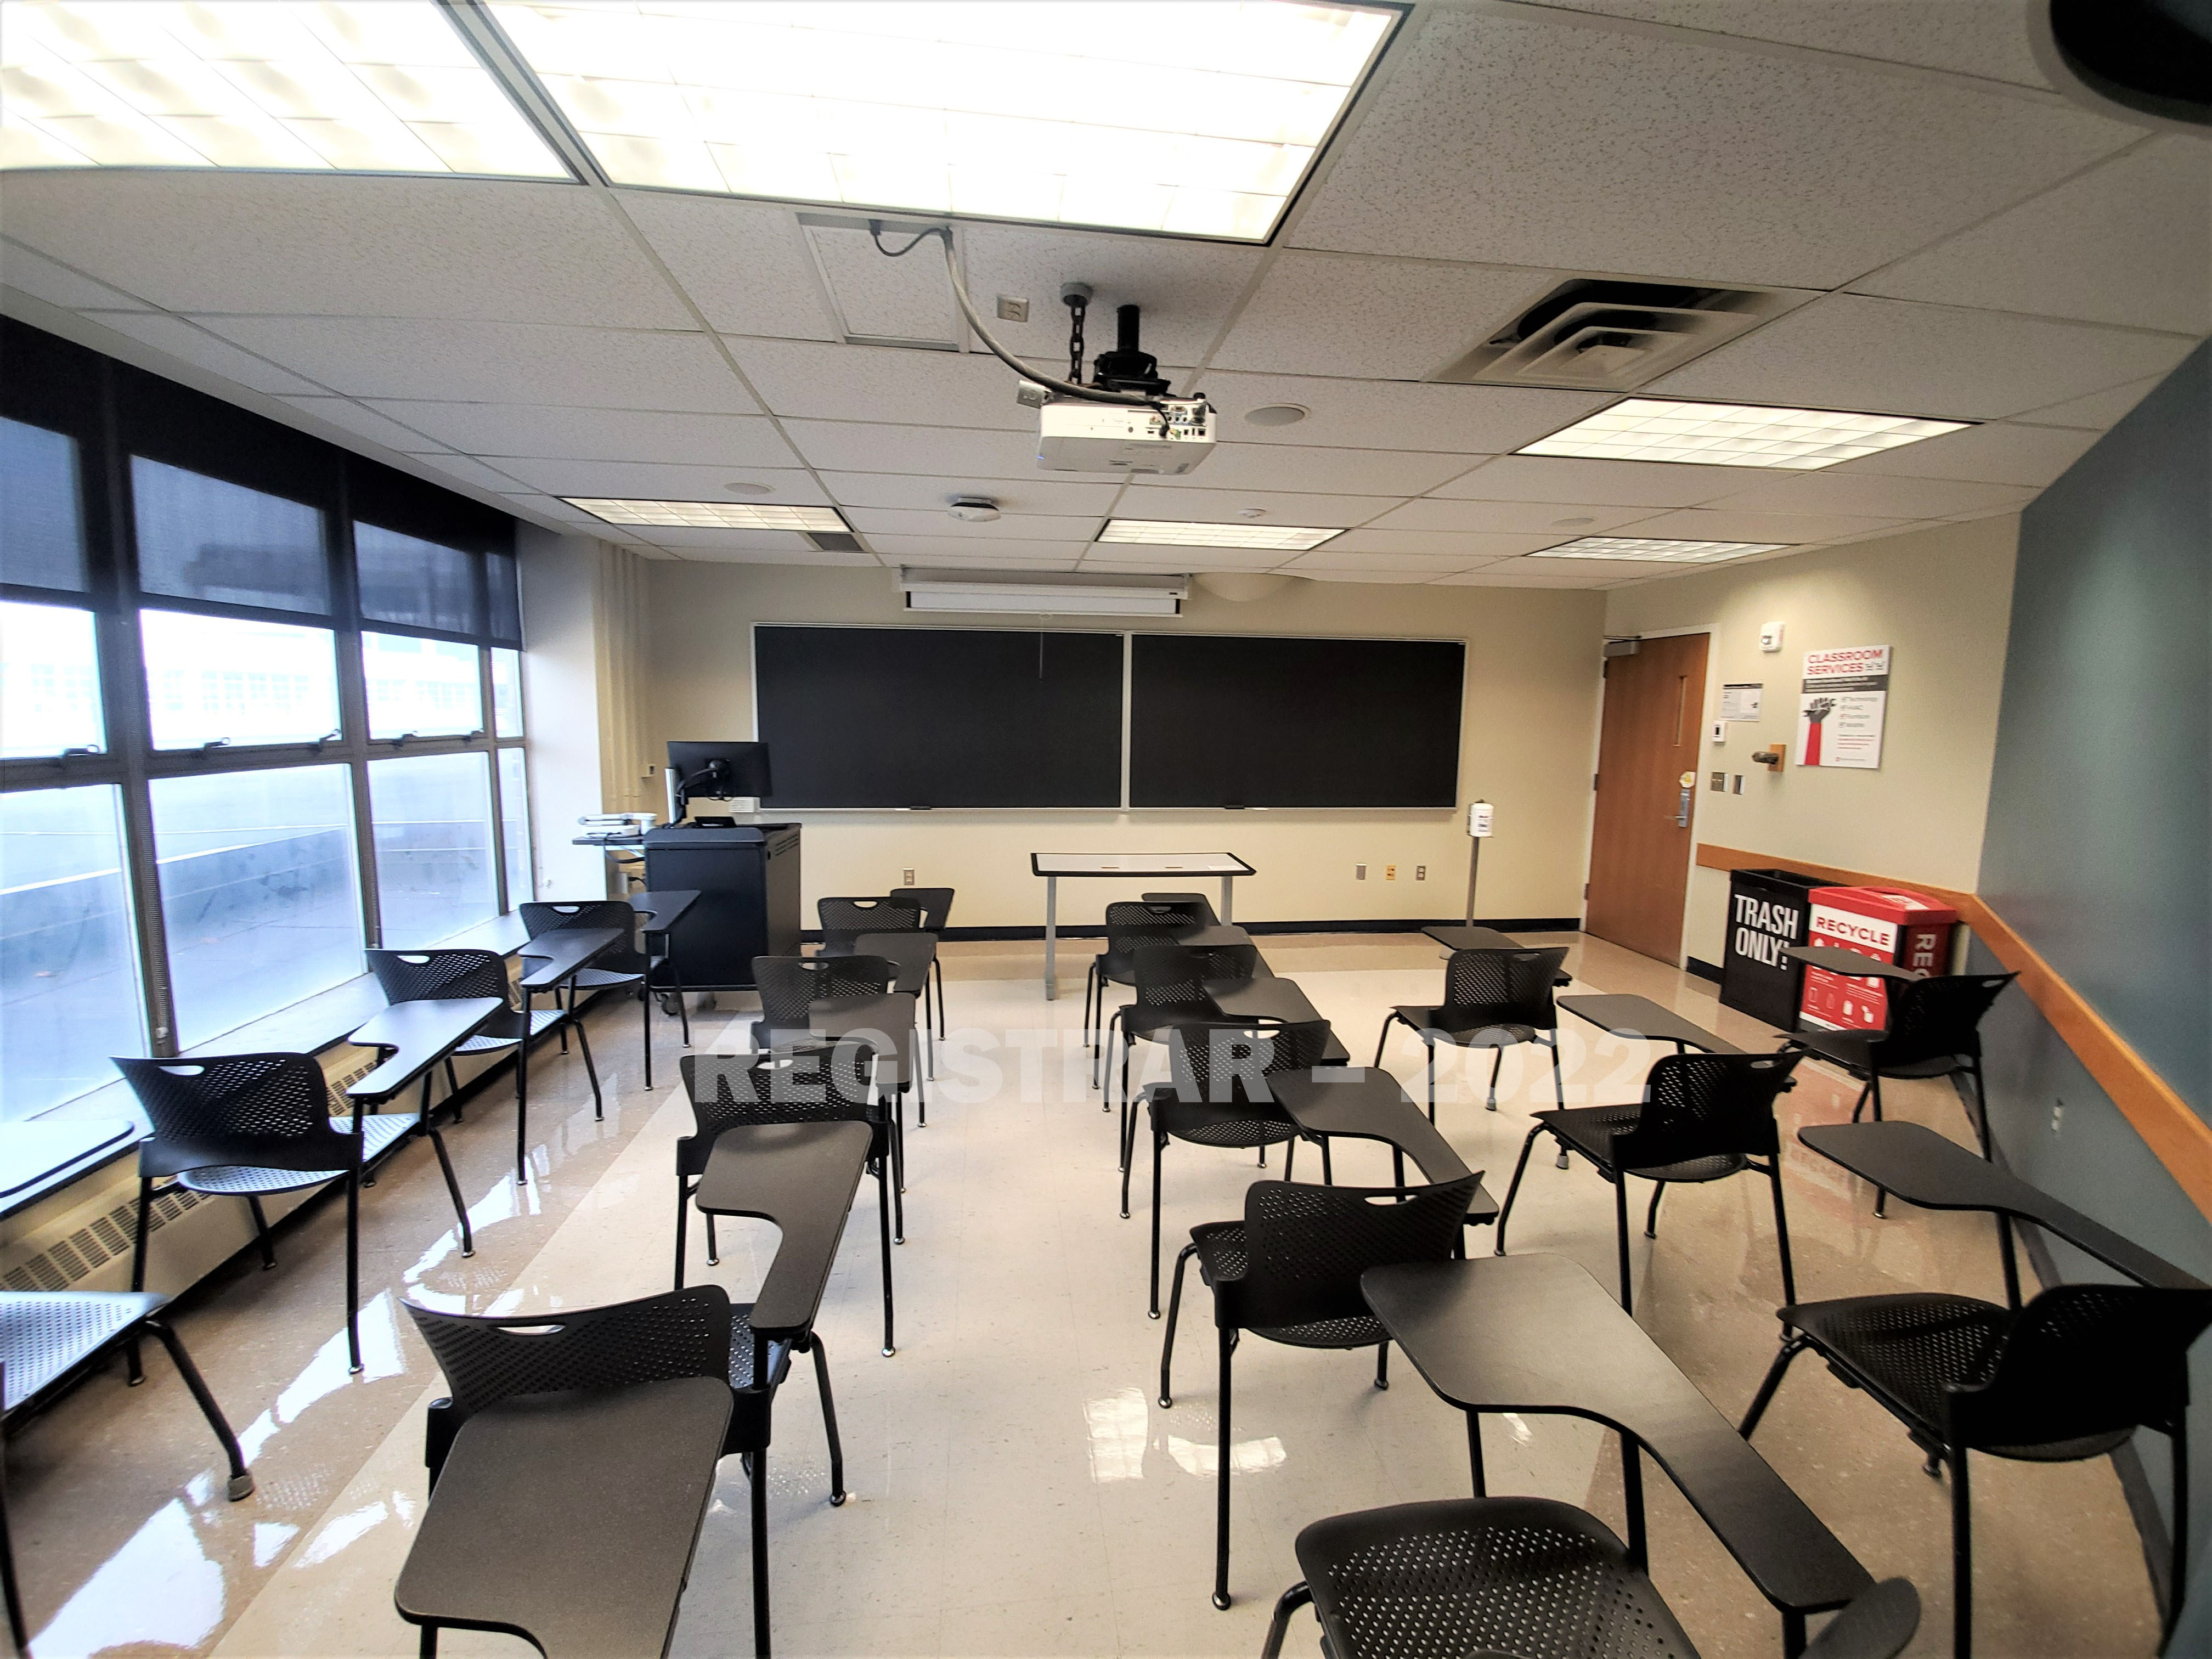 Enarson Classroom Building room 248 ultra wide angle view from the back of the room